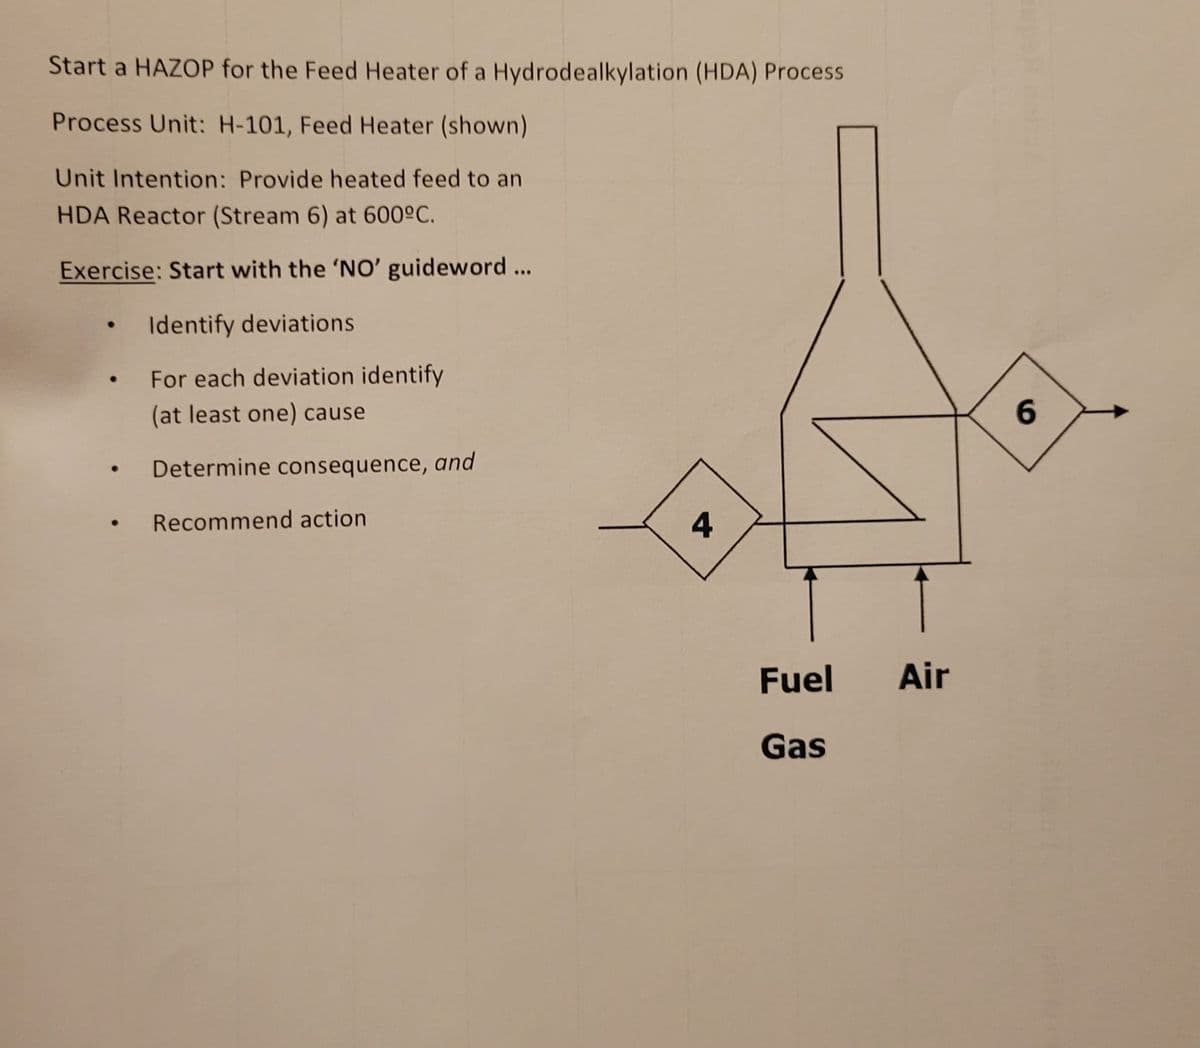 Start a HAZOP for the Feed Heater of a Hydrodealkylation (HDA) Process
Process Unit: H-101, Feed Heater (shown)
Unit Intention: Provide heated feed to an
HDA Reactor (Stream 6) at 600ºC.
Exercise: Start with the 'NO' guideword...
Identify deviations
For each deviation identify
(at least one) cause
Determine consequence, and
Recommend action
●
4
Fuel
Gas
Air
6